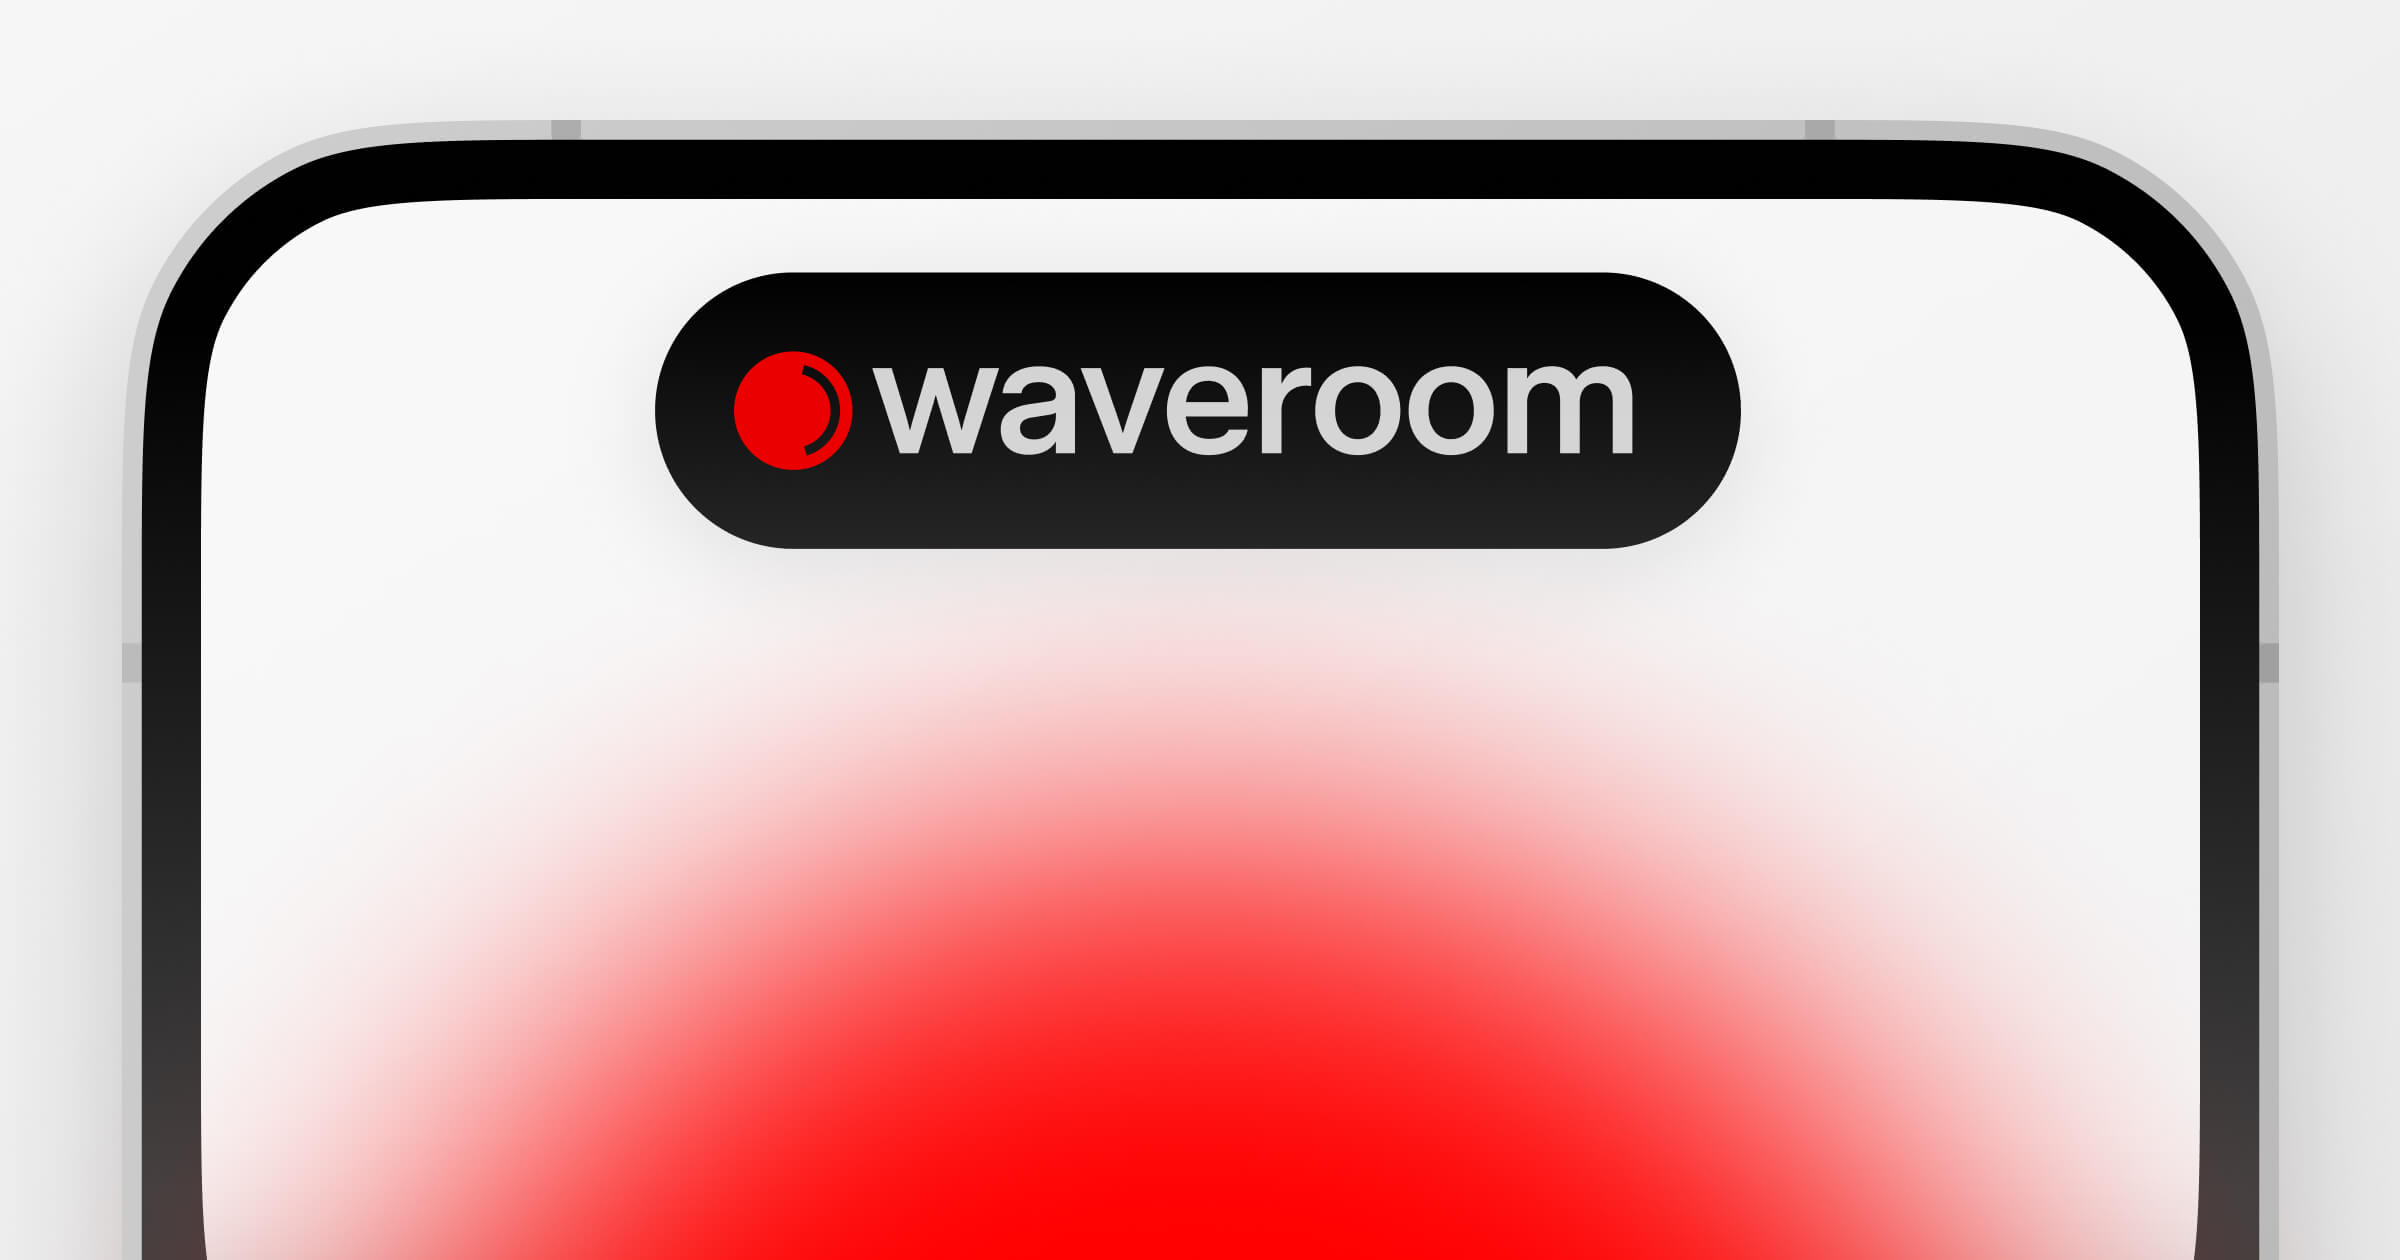 How to Use iPhone Continuity Camera with Waveroom